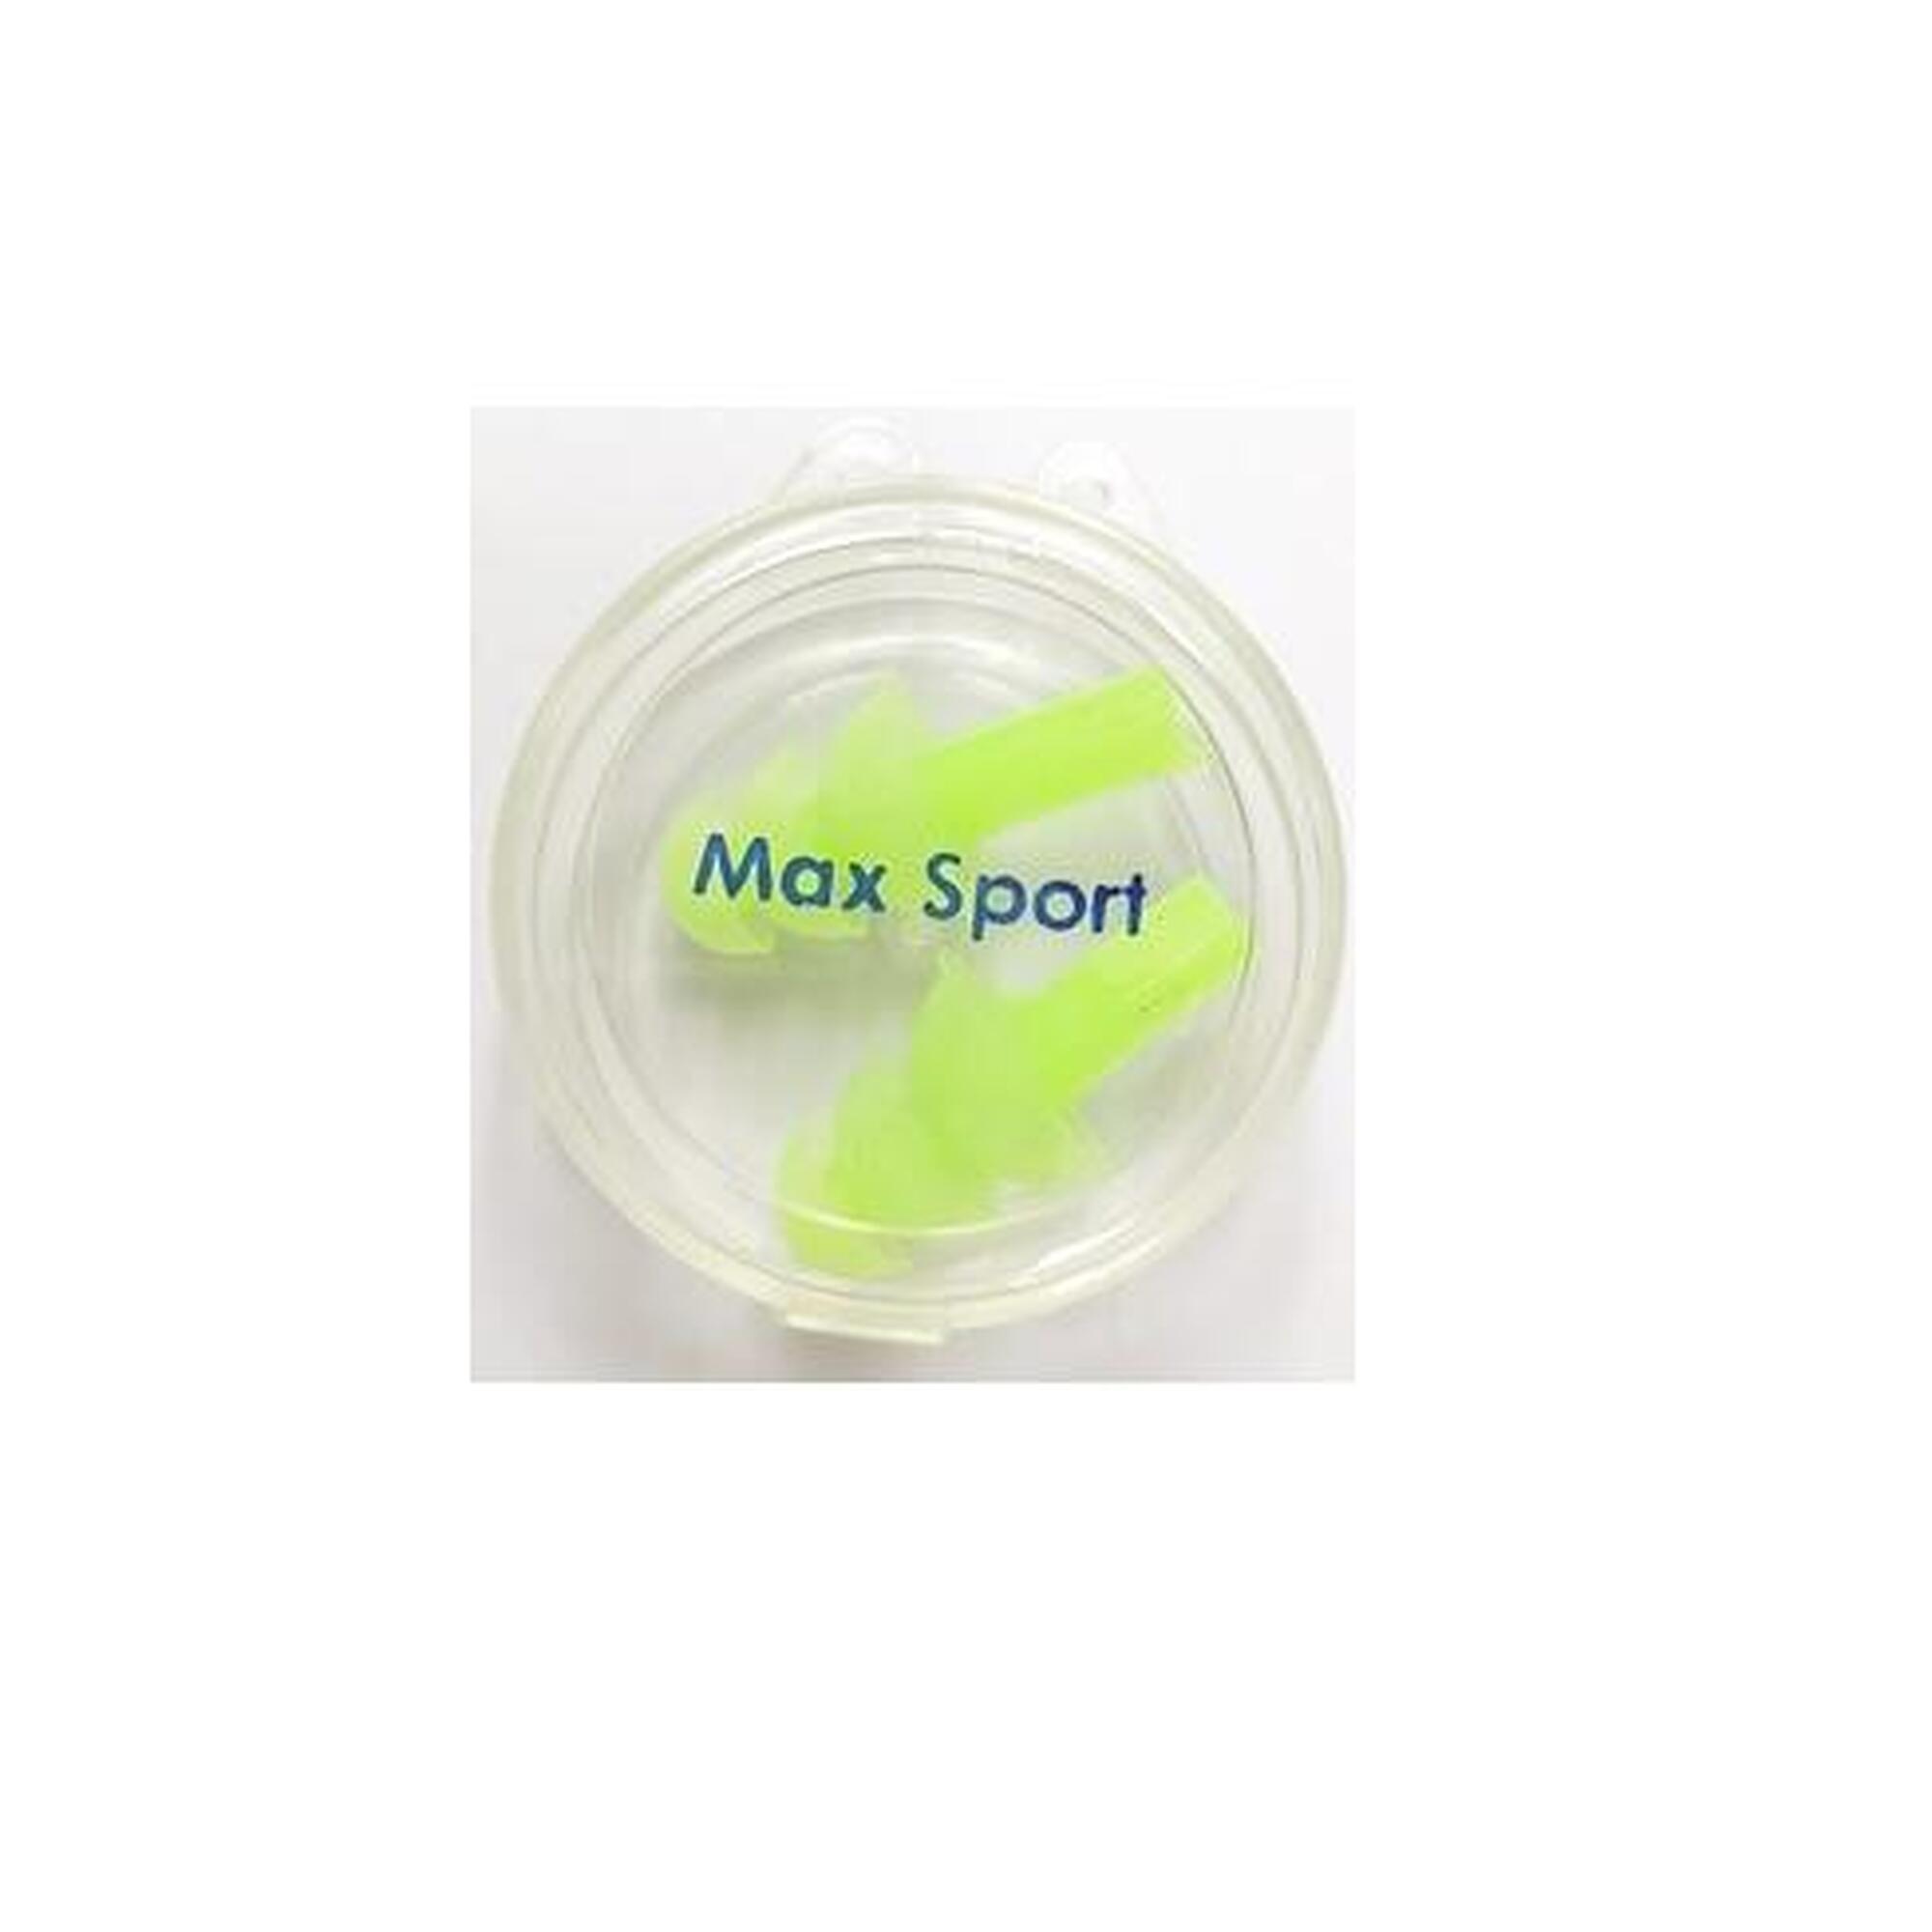 MS-9058 Silicone Swimming Ear Plugs (One Pair) - Green